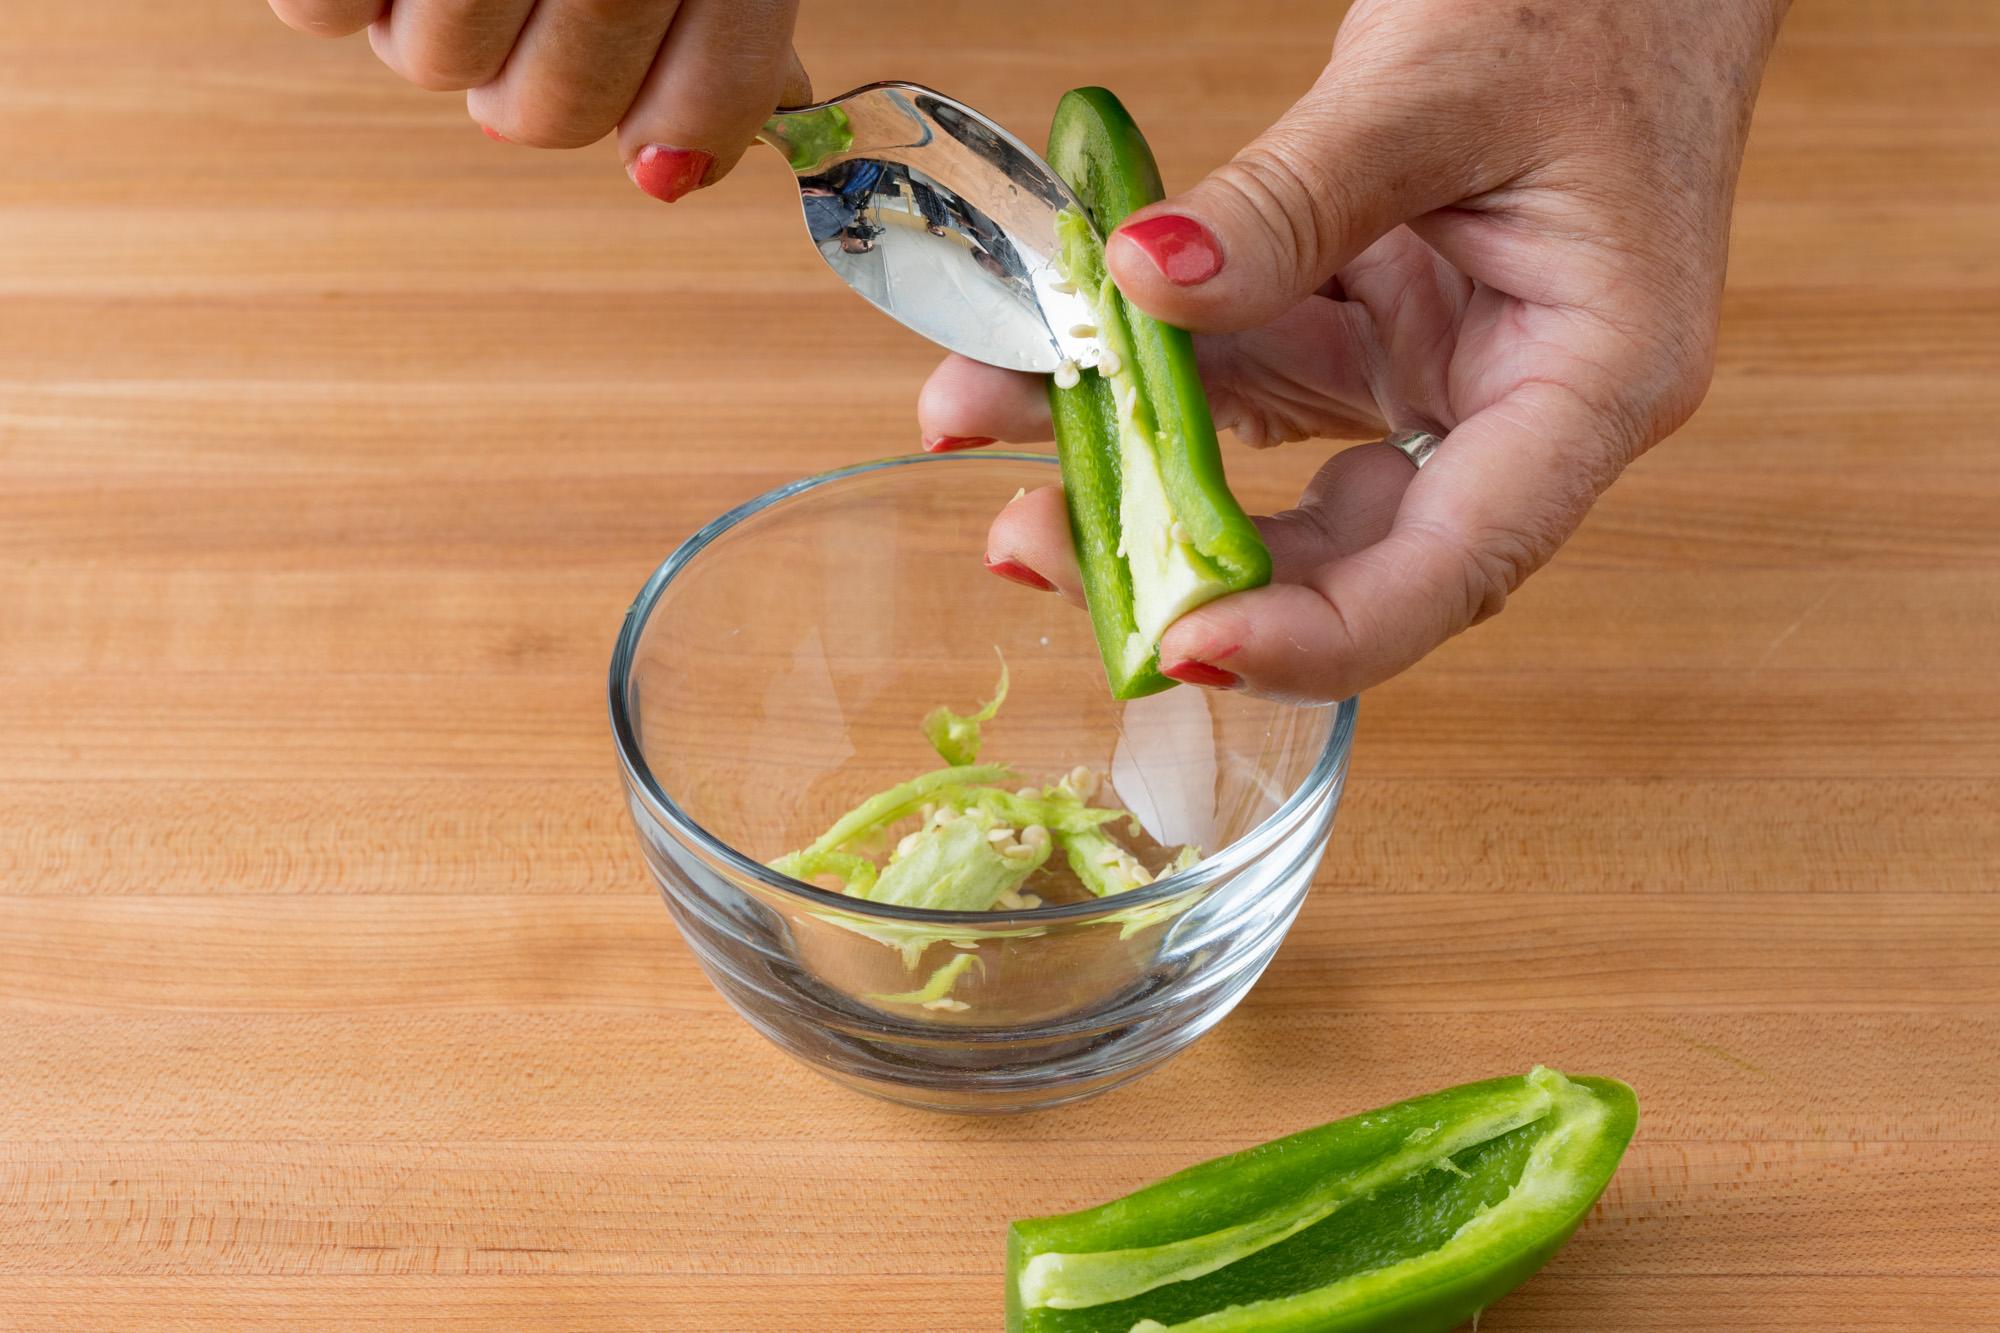 Scooping the jalapenos out with a spoon.